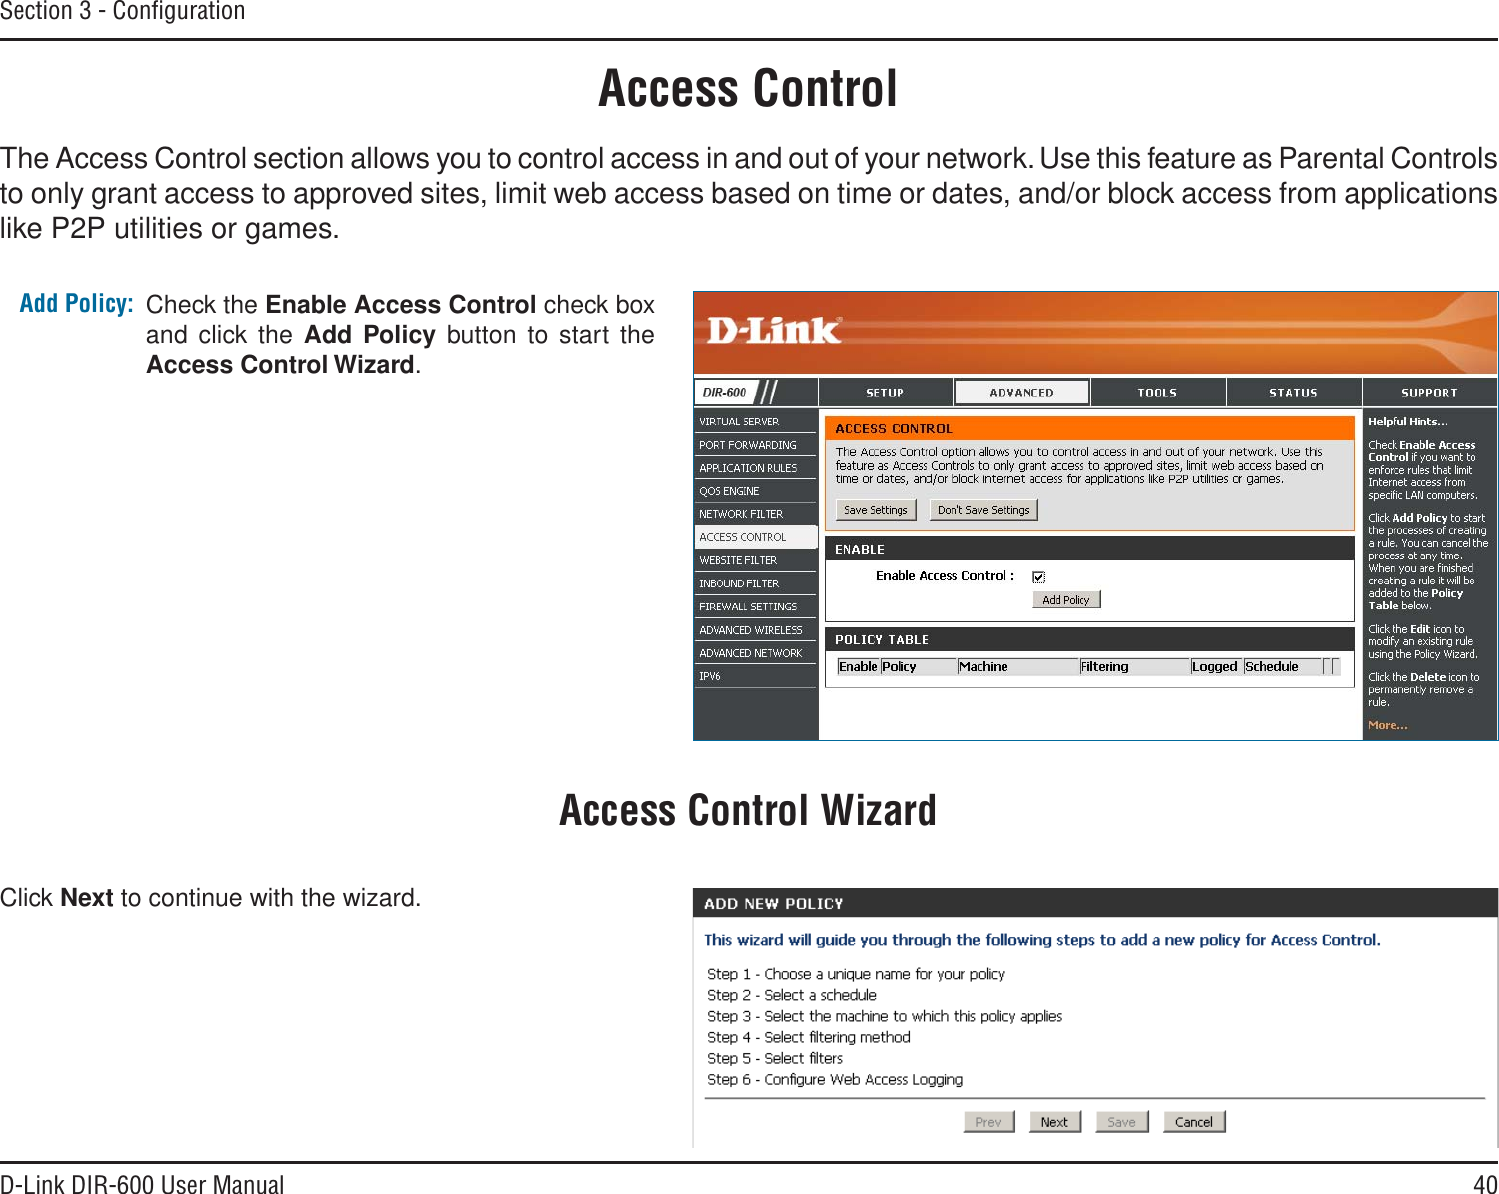 40D-Link DIR-600 User ManualSection 3 - ConﬁgurationAccess ControlCheck the Enable Access Control check box and click the Add Policy button to start the Access Control Wizard. Add Policy:The Access Control section allows you to control access in and out of your network. Use this feature as Parental Controls to only grant access to approved sites, limit web access based on time or dates, and/or block access from applications like P2P utilities or games.Click Next to continue with the wizard.Access Control Wizard